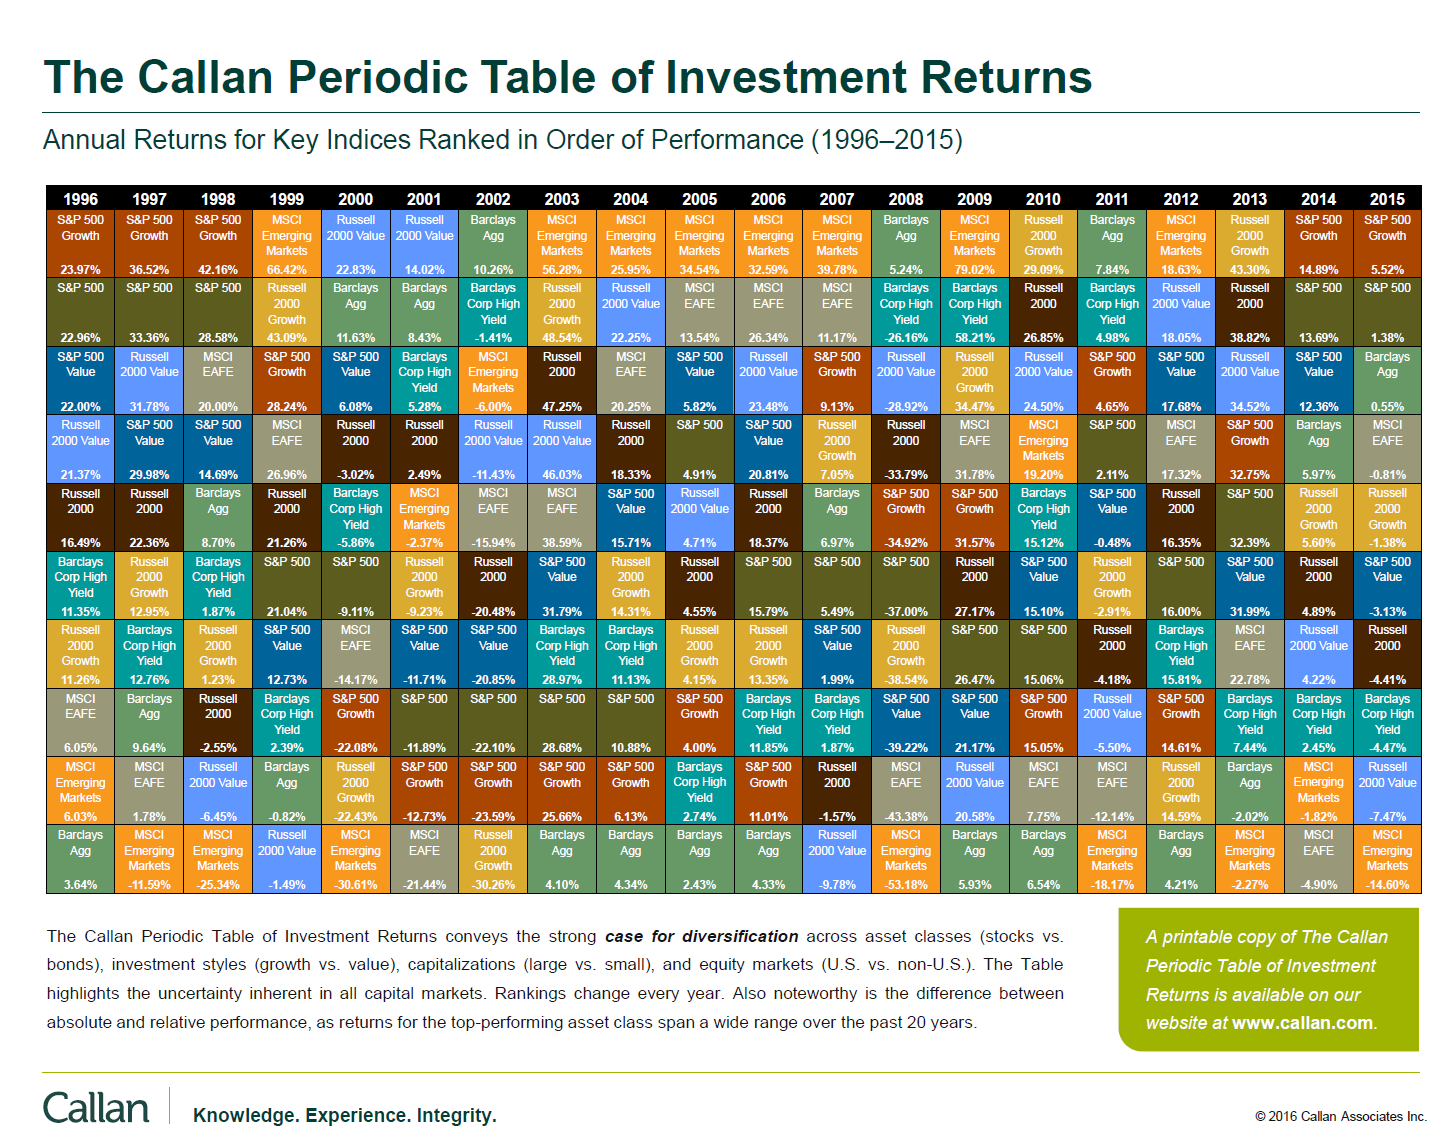 Callan-Periodic-Table-of-Investment-Returns-2015.png